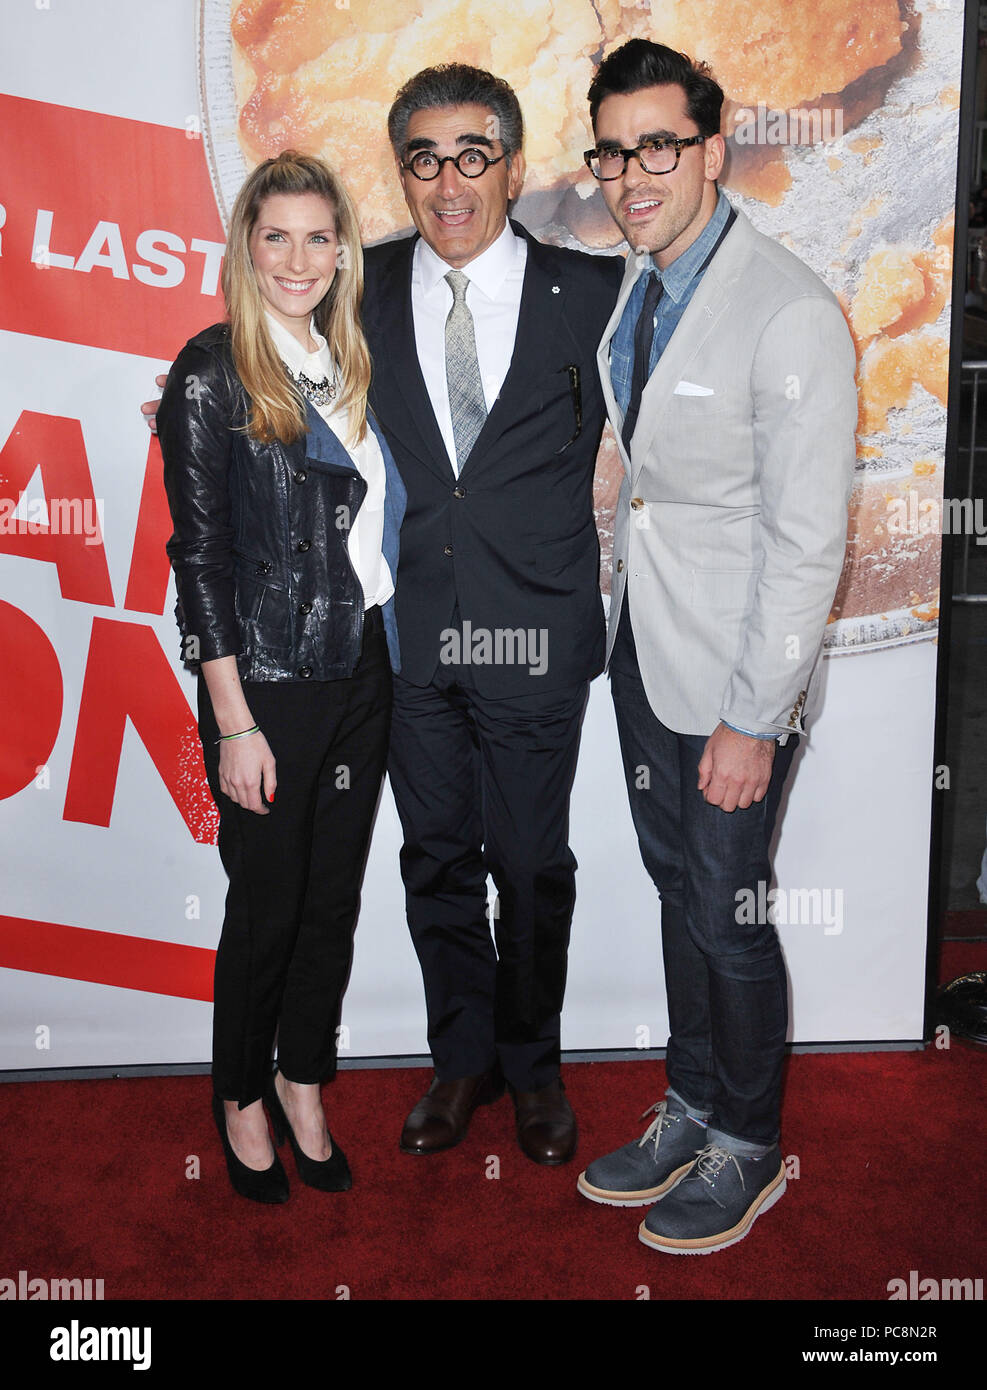 Eugene Levy and family at the American Reunion Premiere at the Chinese  Theatre In Los  Levy and family ------------- Red Carpet  Event, Vertical, USA, Film Industry, Celebrities, Photography, Bestof, Arts  Culture